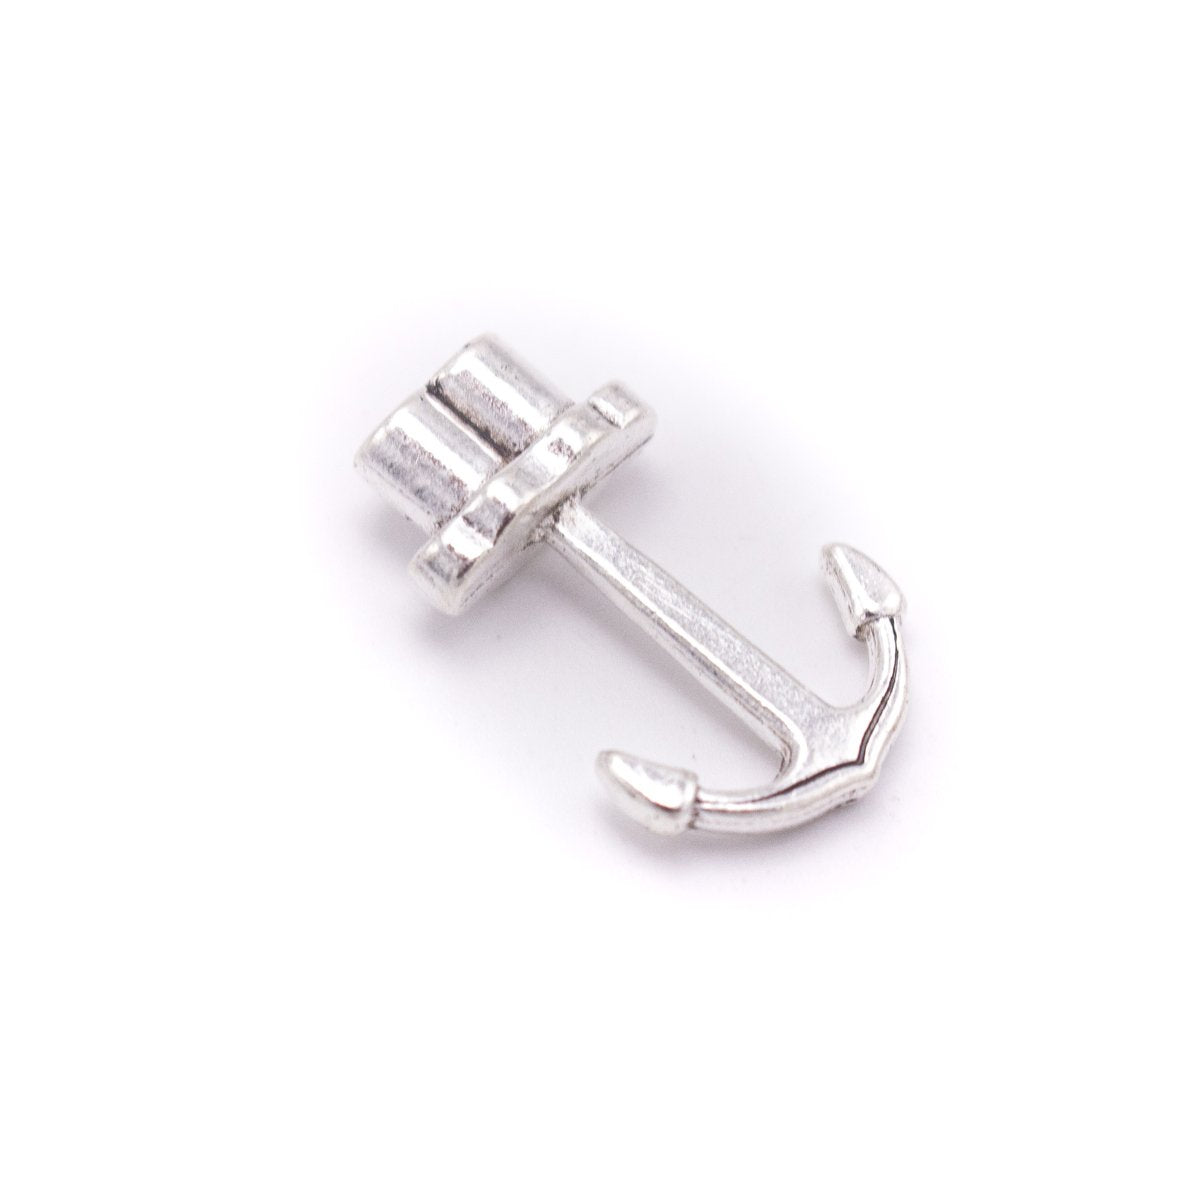 10 Units For3mm leather clasp, for 3mm round antique silver snap clasp jewelry finding D-6-260